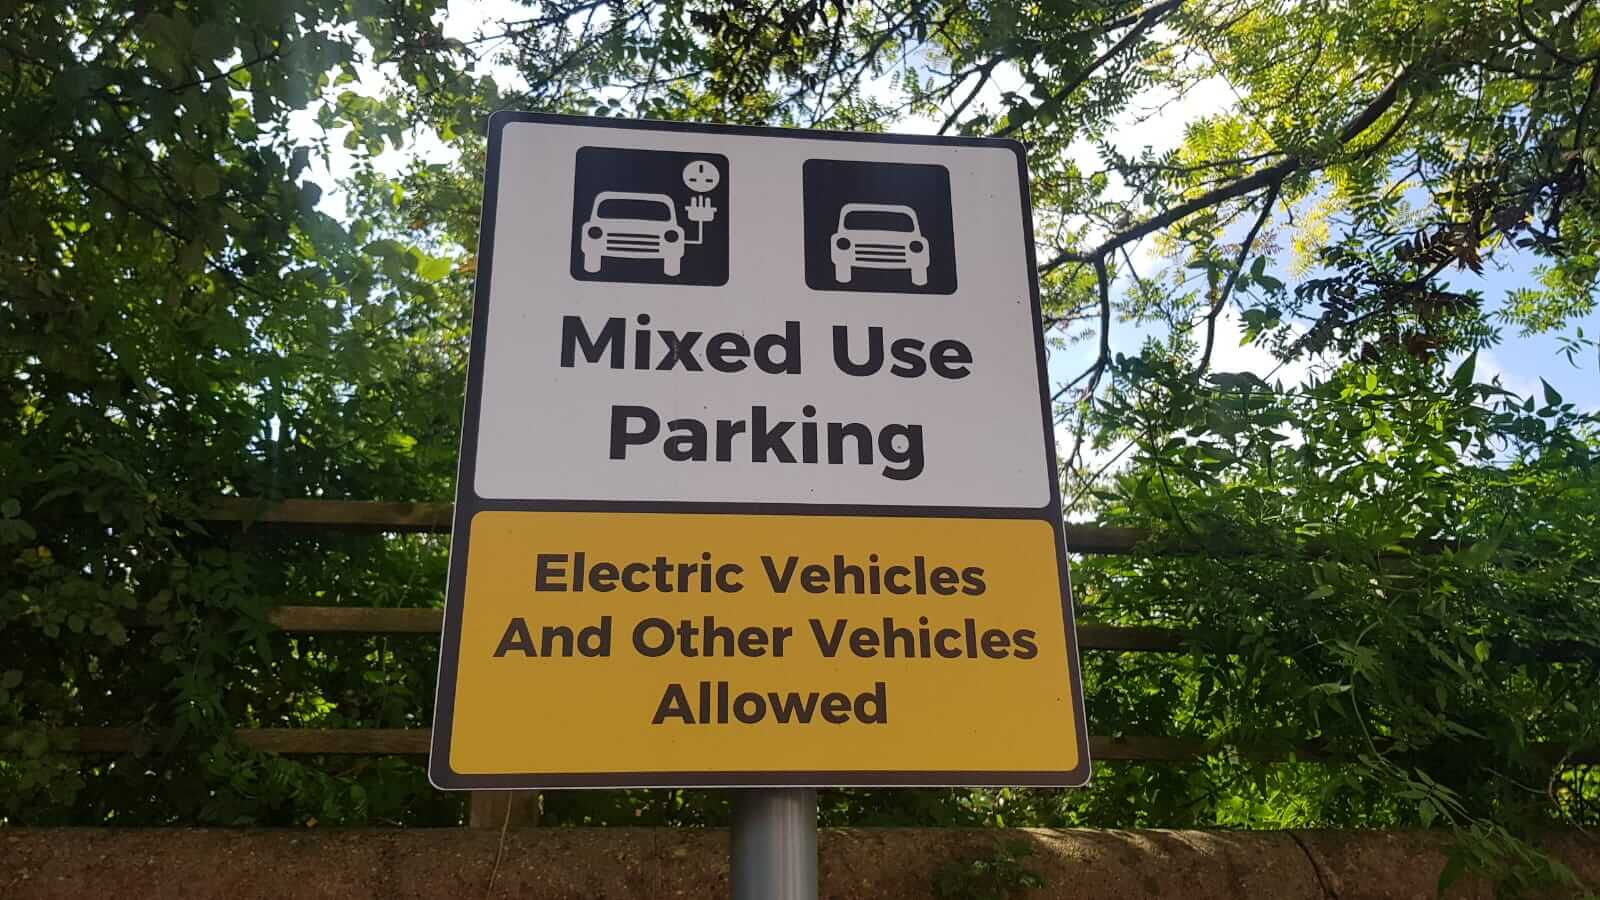 Mixed use parking sign for electric vehicle charging